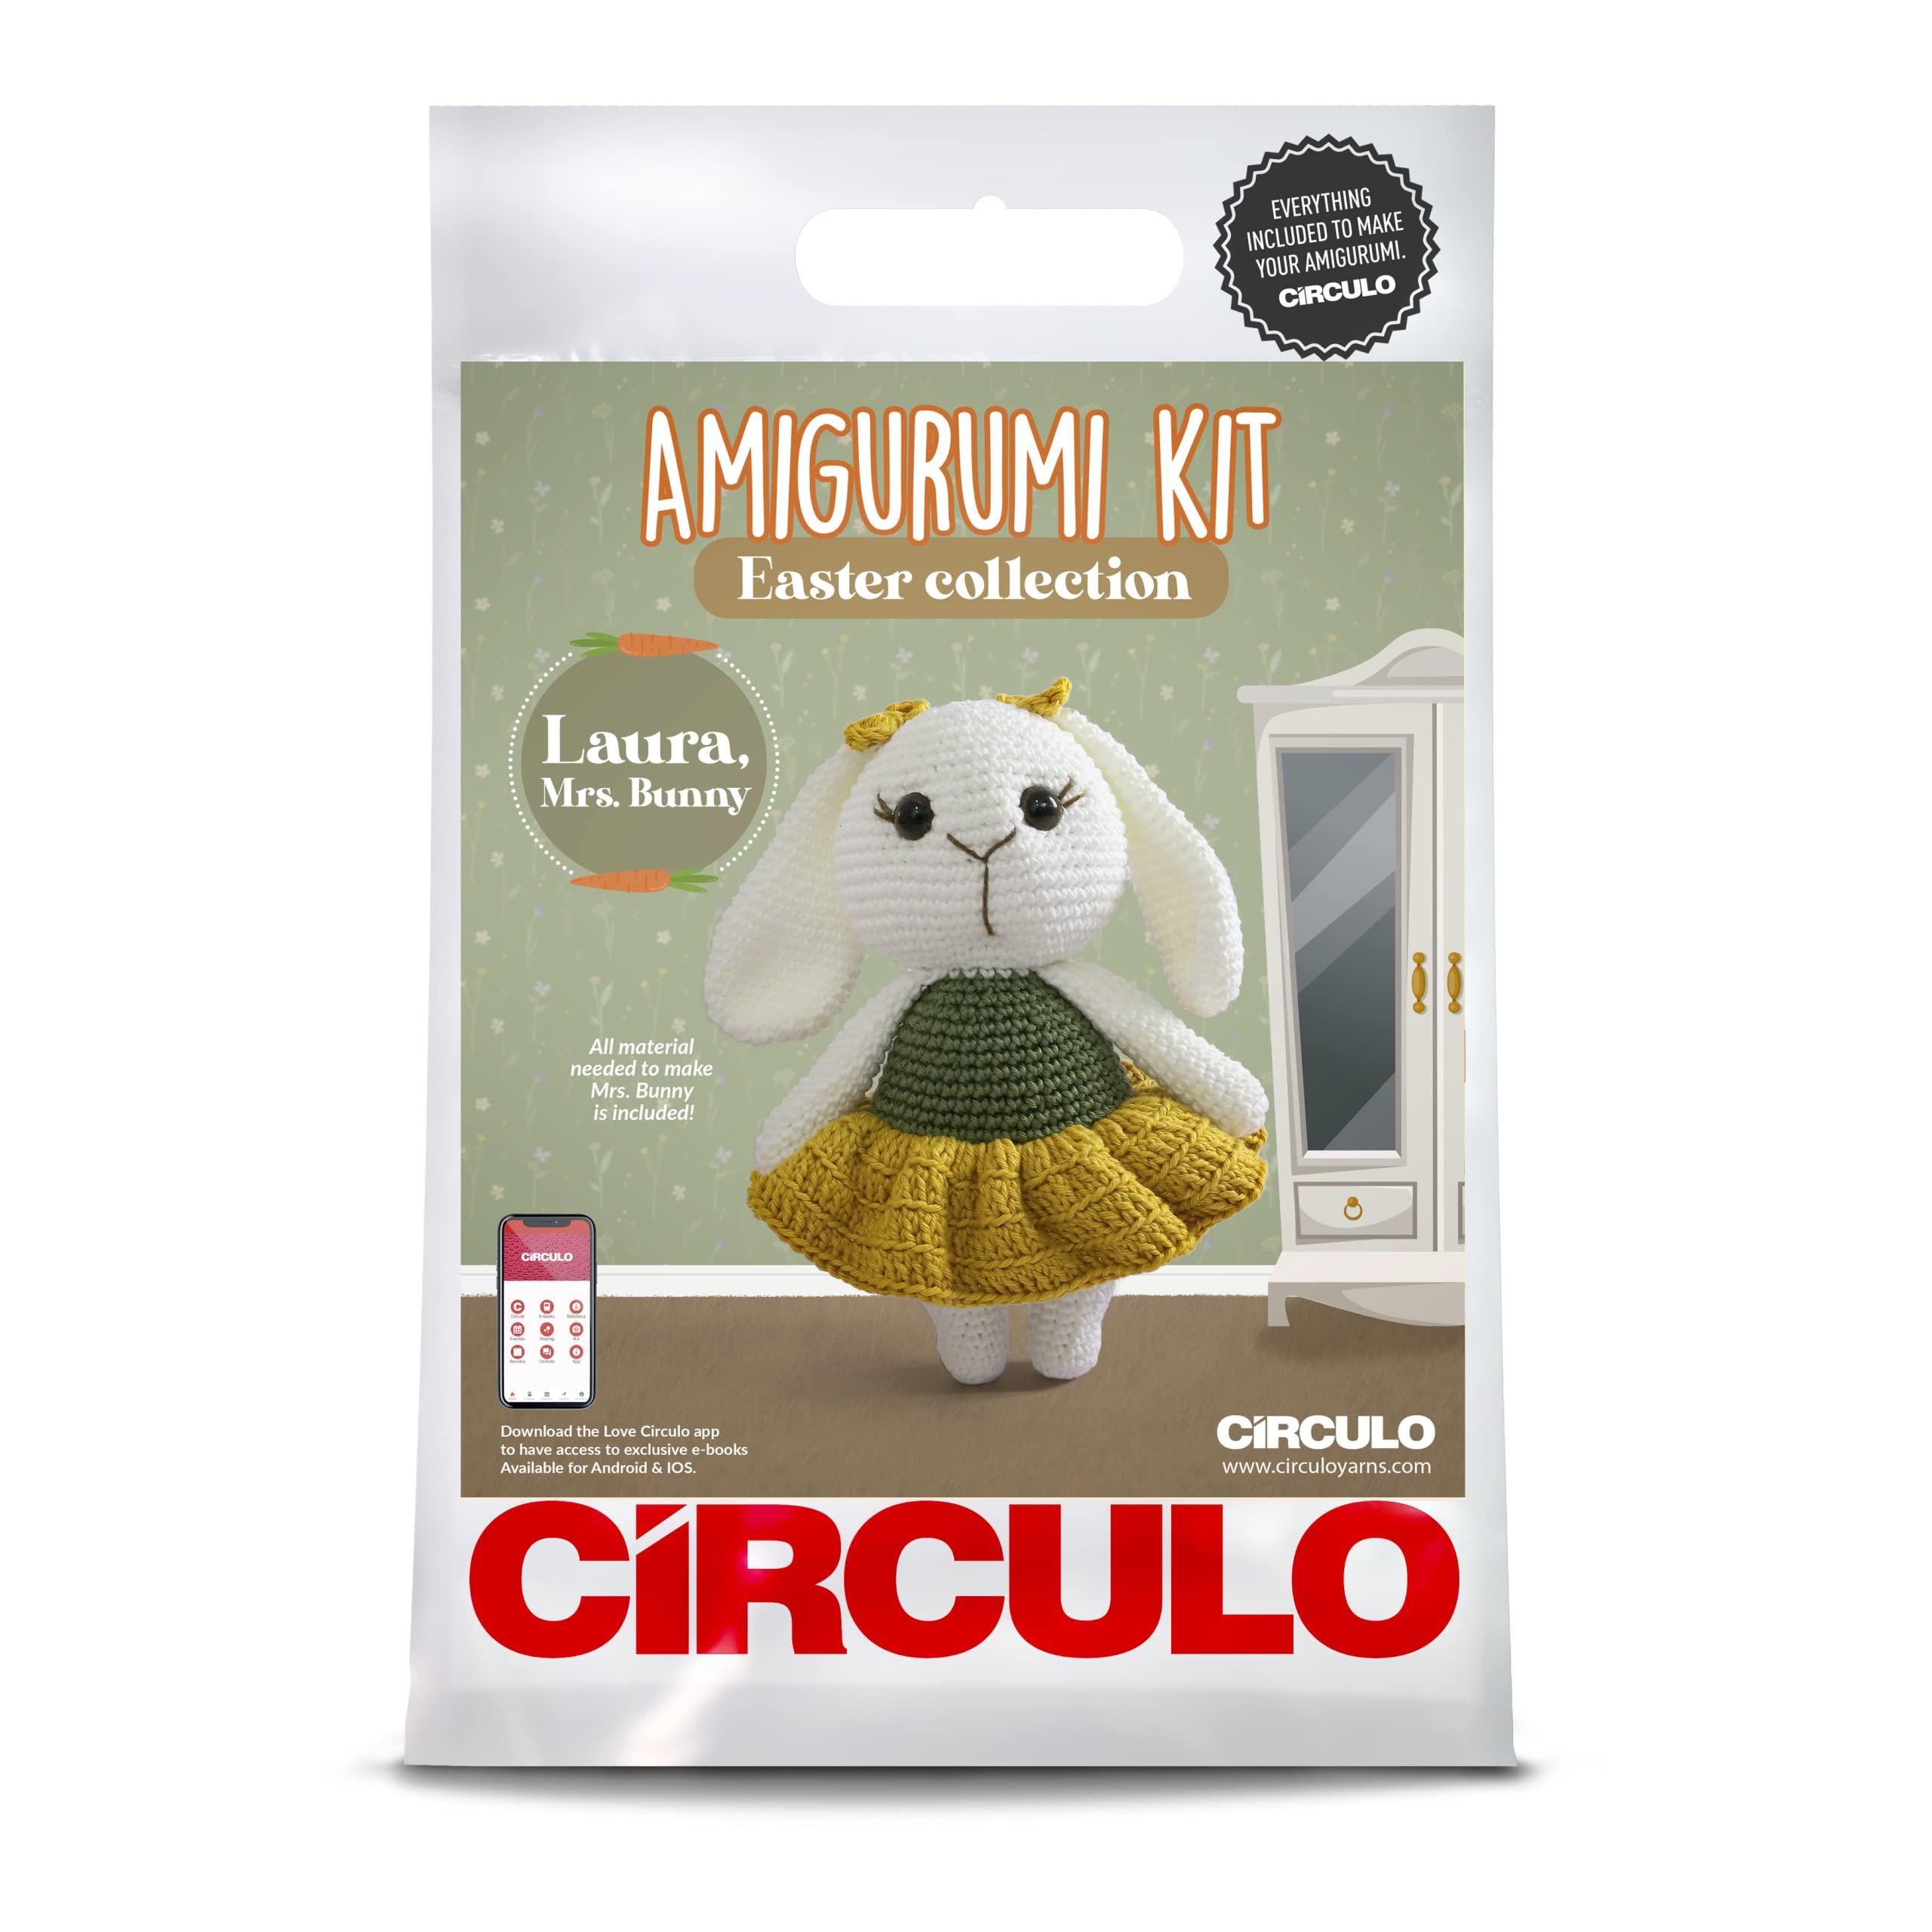 Crculo circulo amigurumi kit - easter collection 2023 - all materials included, clear easy to follow instructions - 1 crochet kit (l